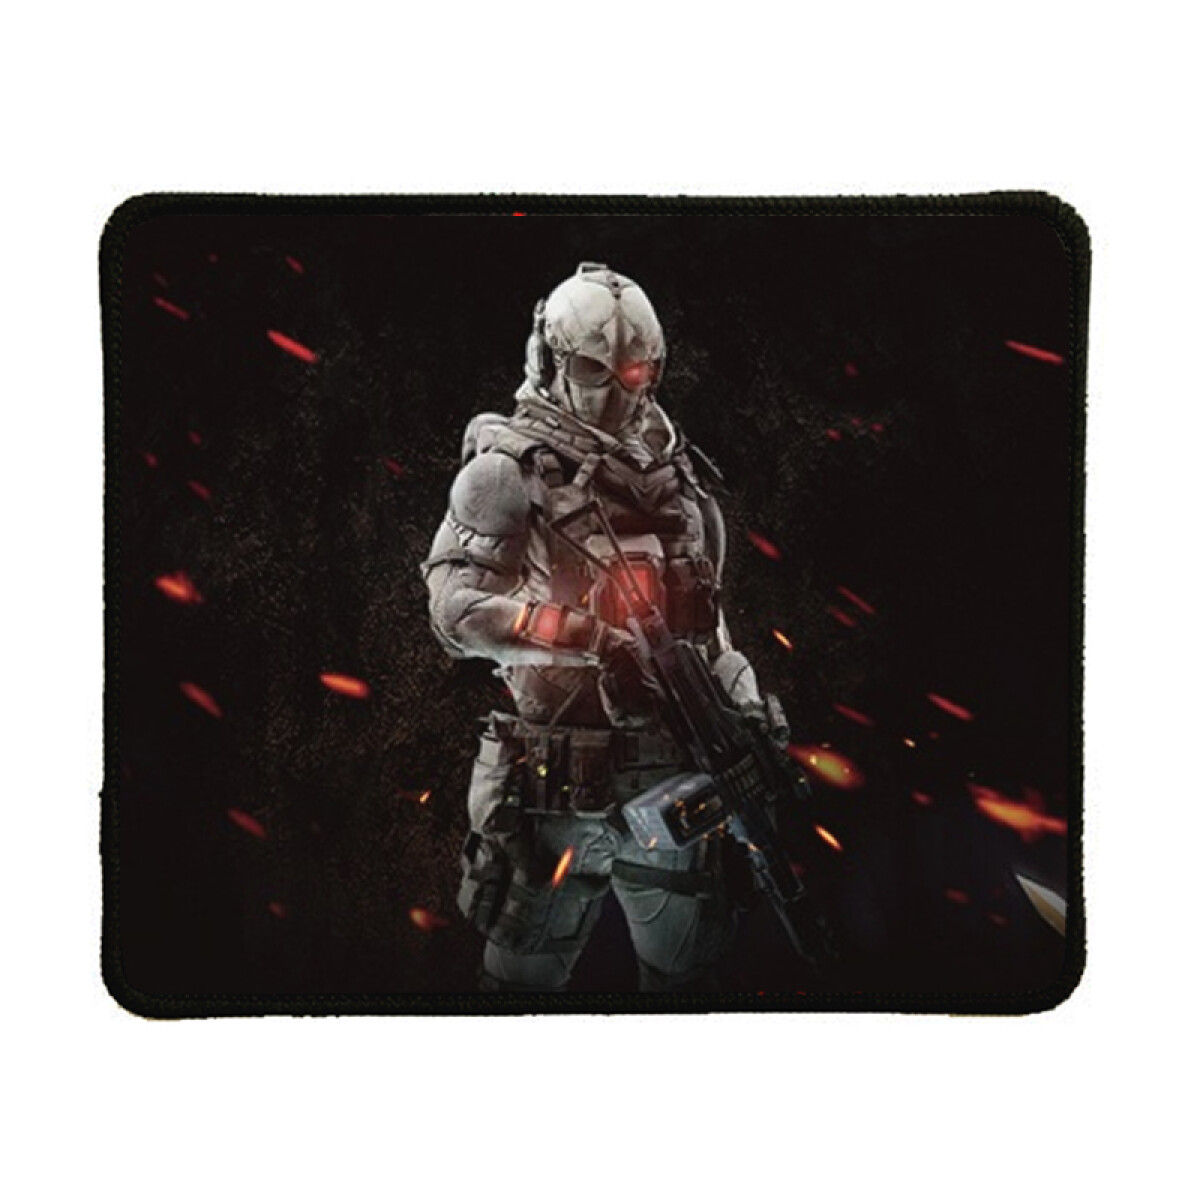 Mouse Pad Gamer K6 - Unica 